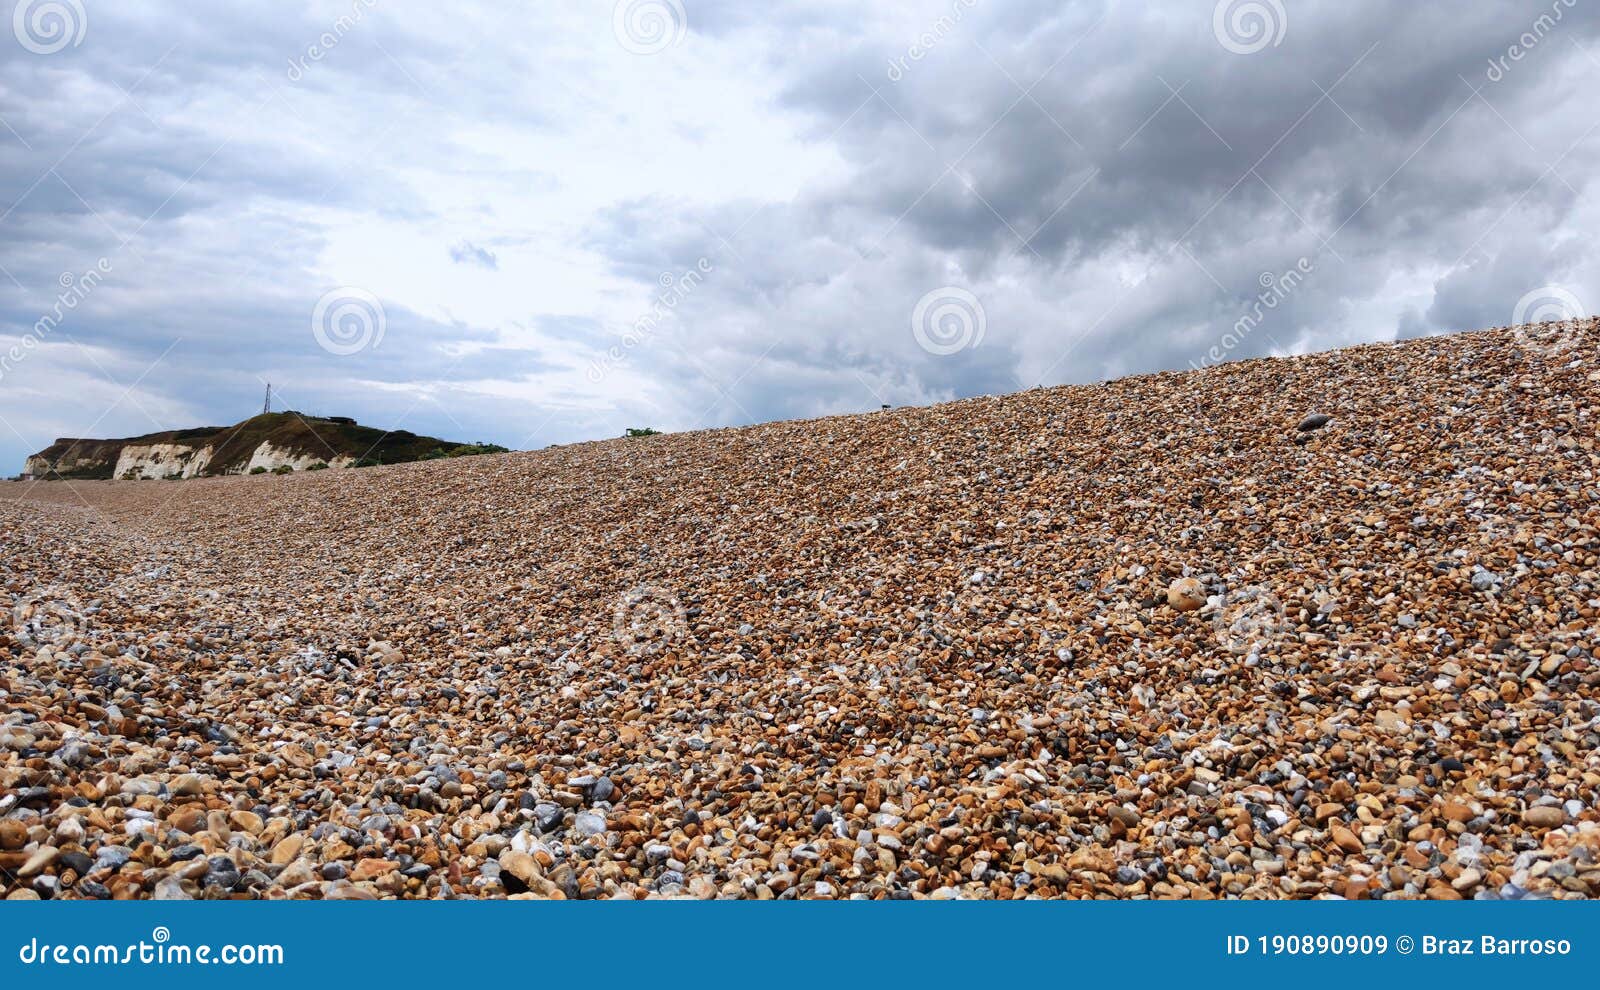 colorful stone beach in newhaven, clean blue water, england just beautiful!